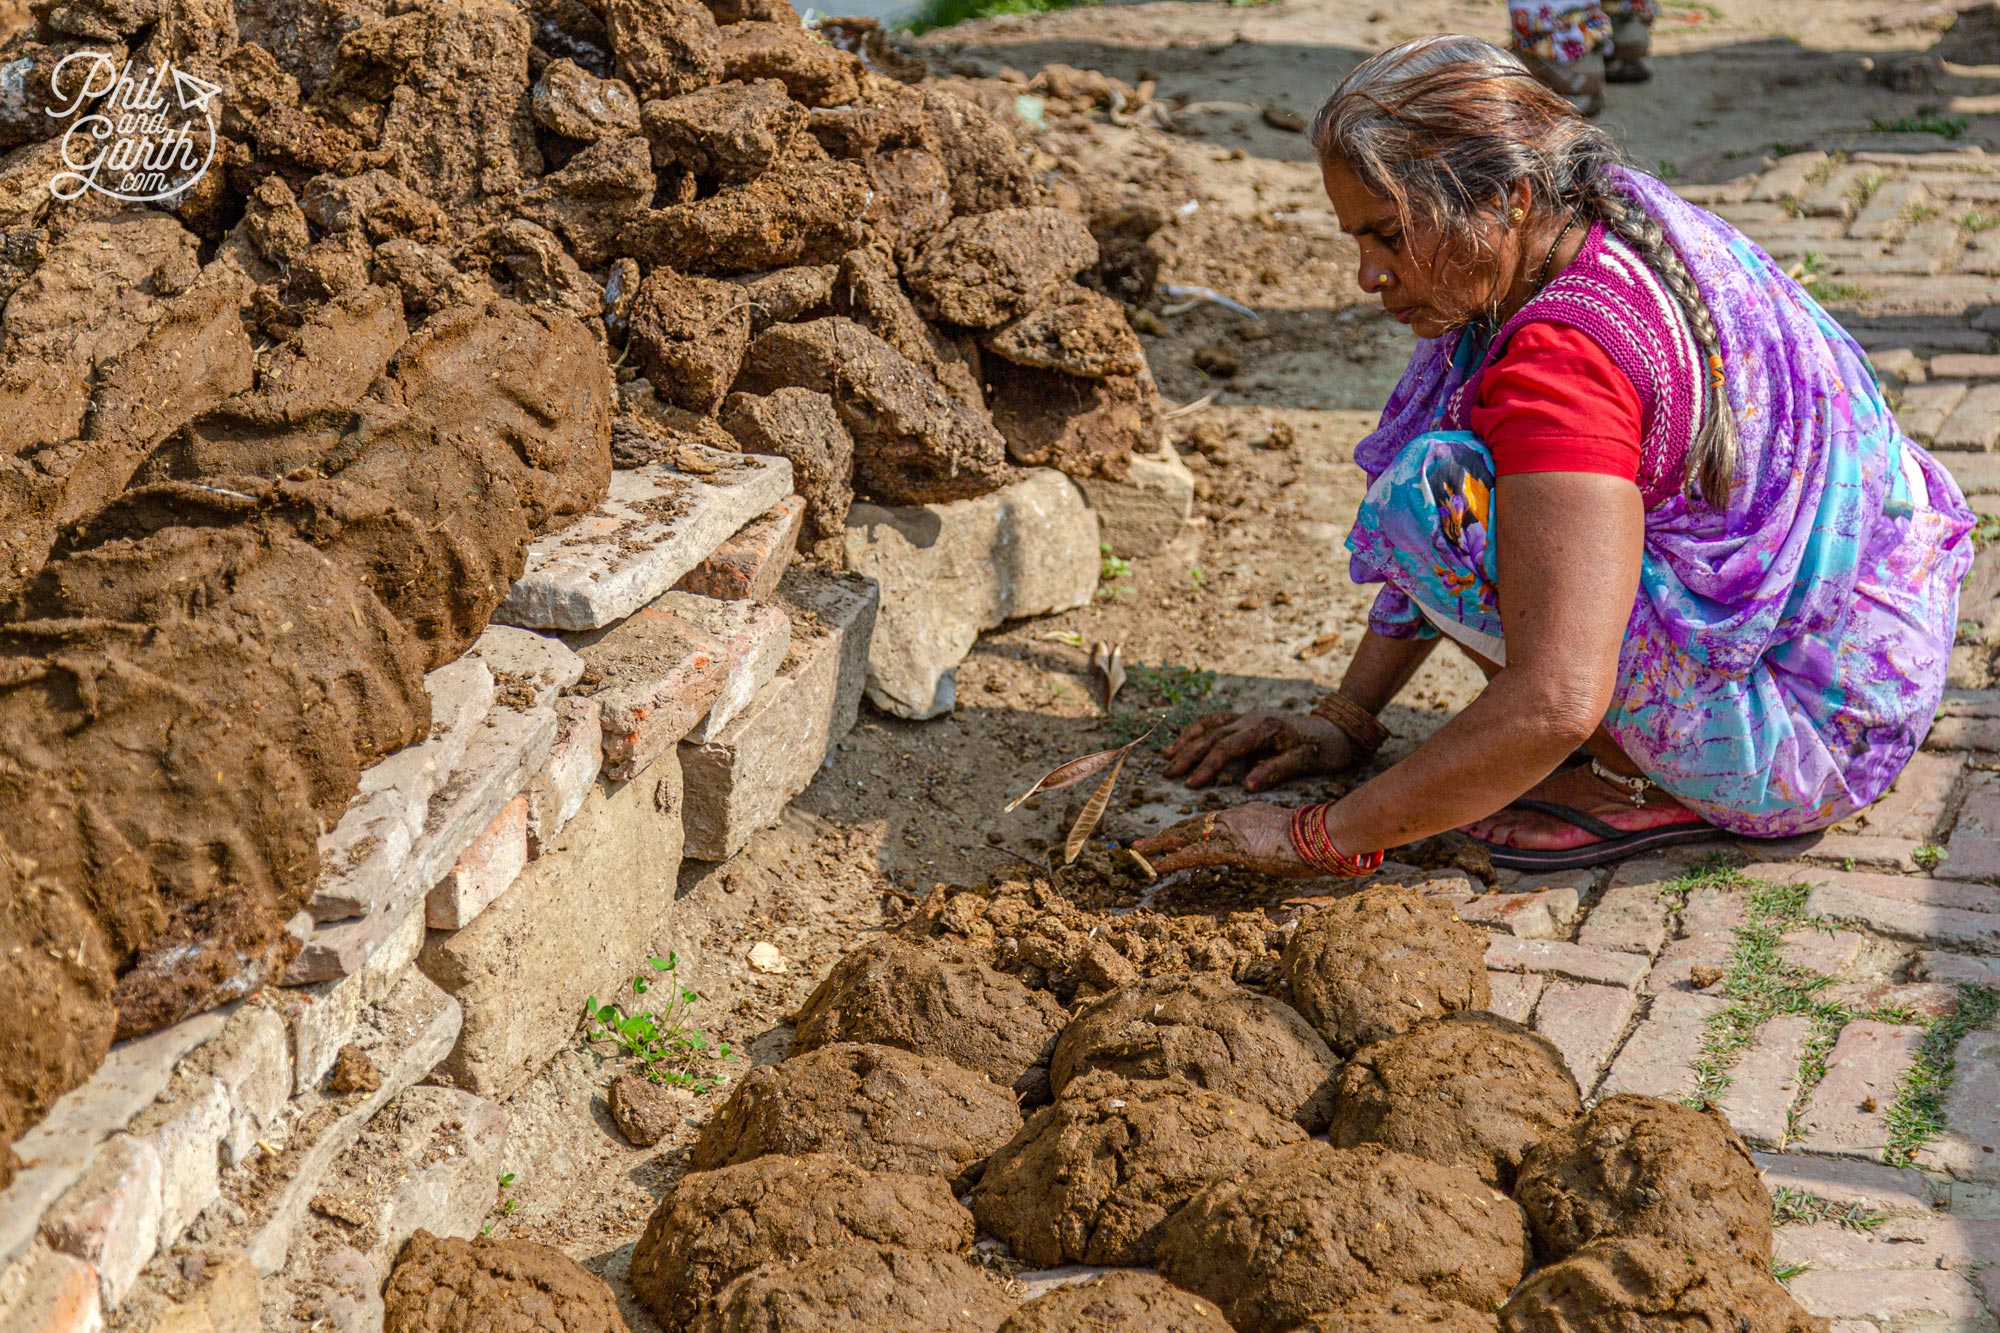 A lady making 'Dung cakes' from cow dung, which are dried and used as fuel